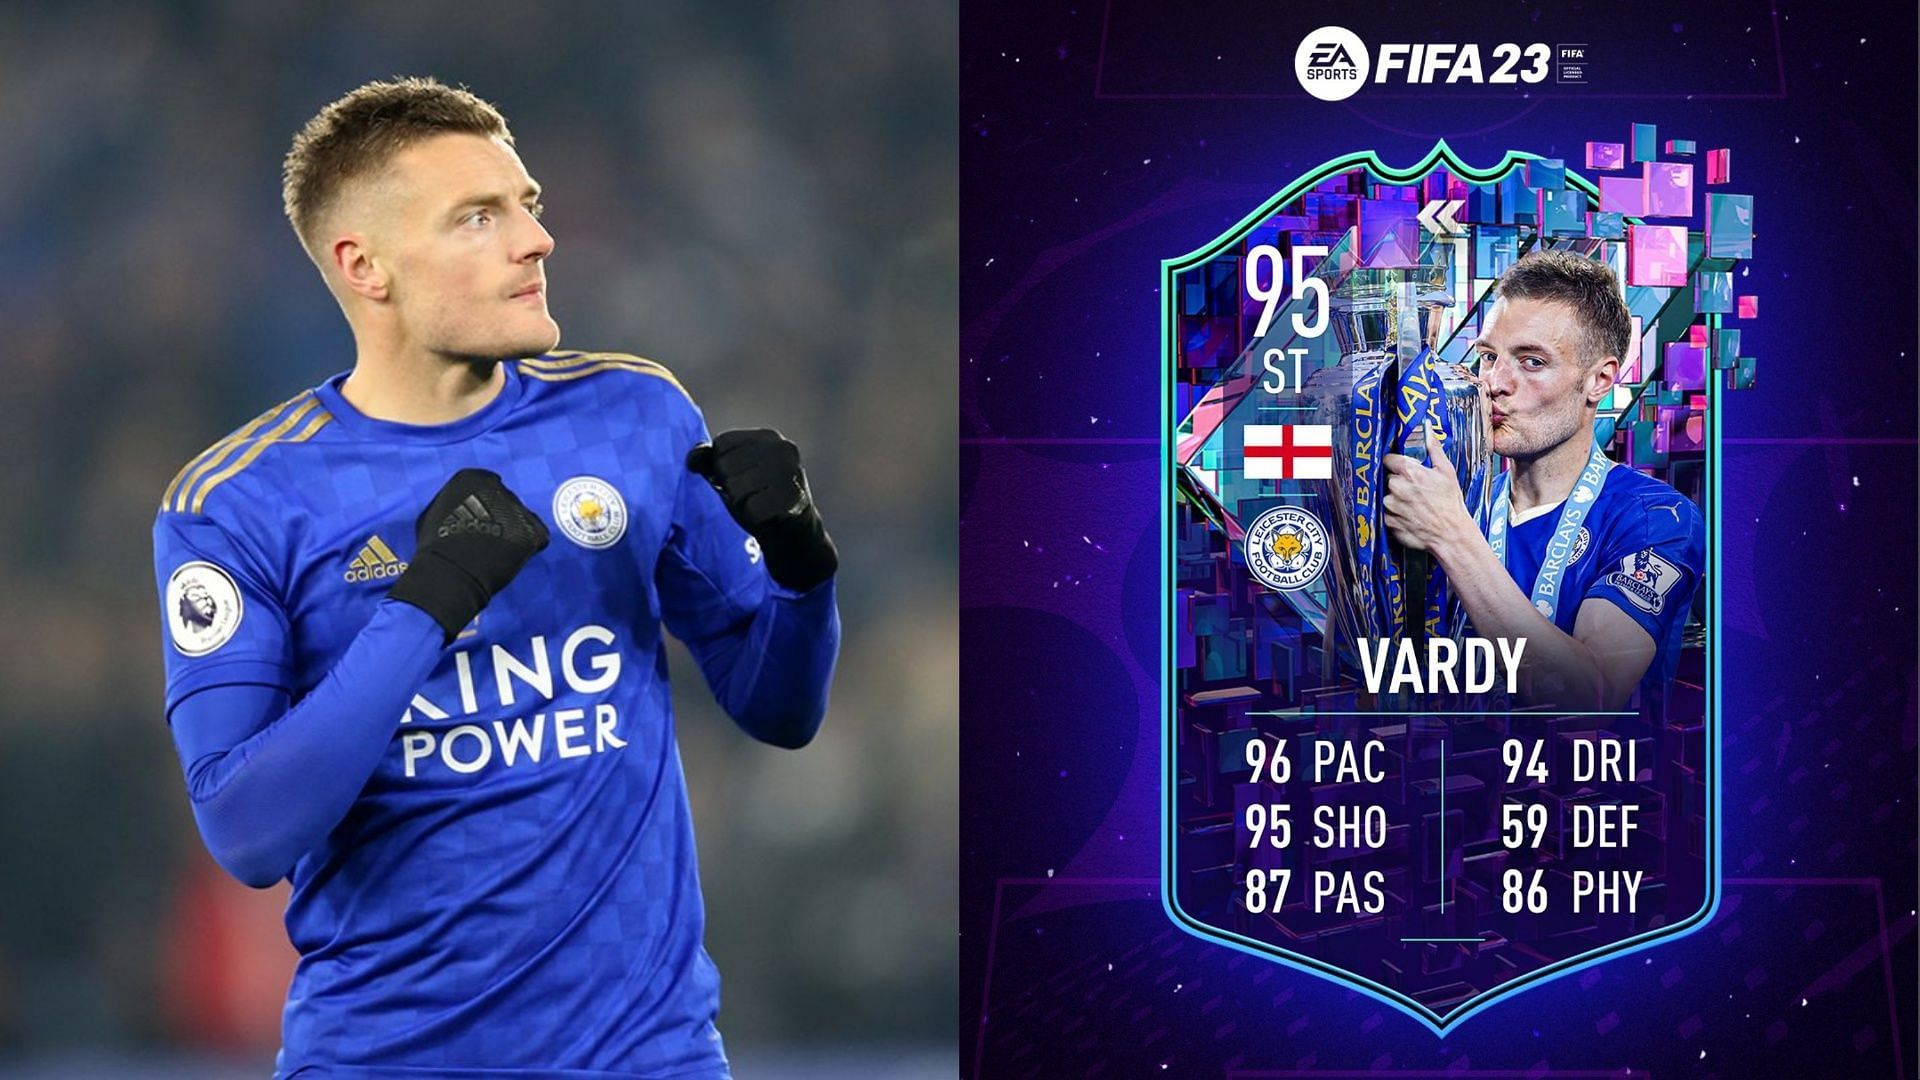 A special Vardy Flashback card is coming to FIFA 23 (Images via Premier League, Twitter/FUT Sheriff)